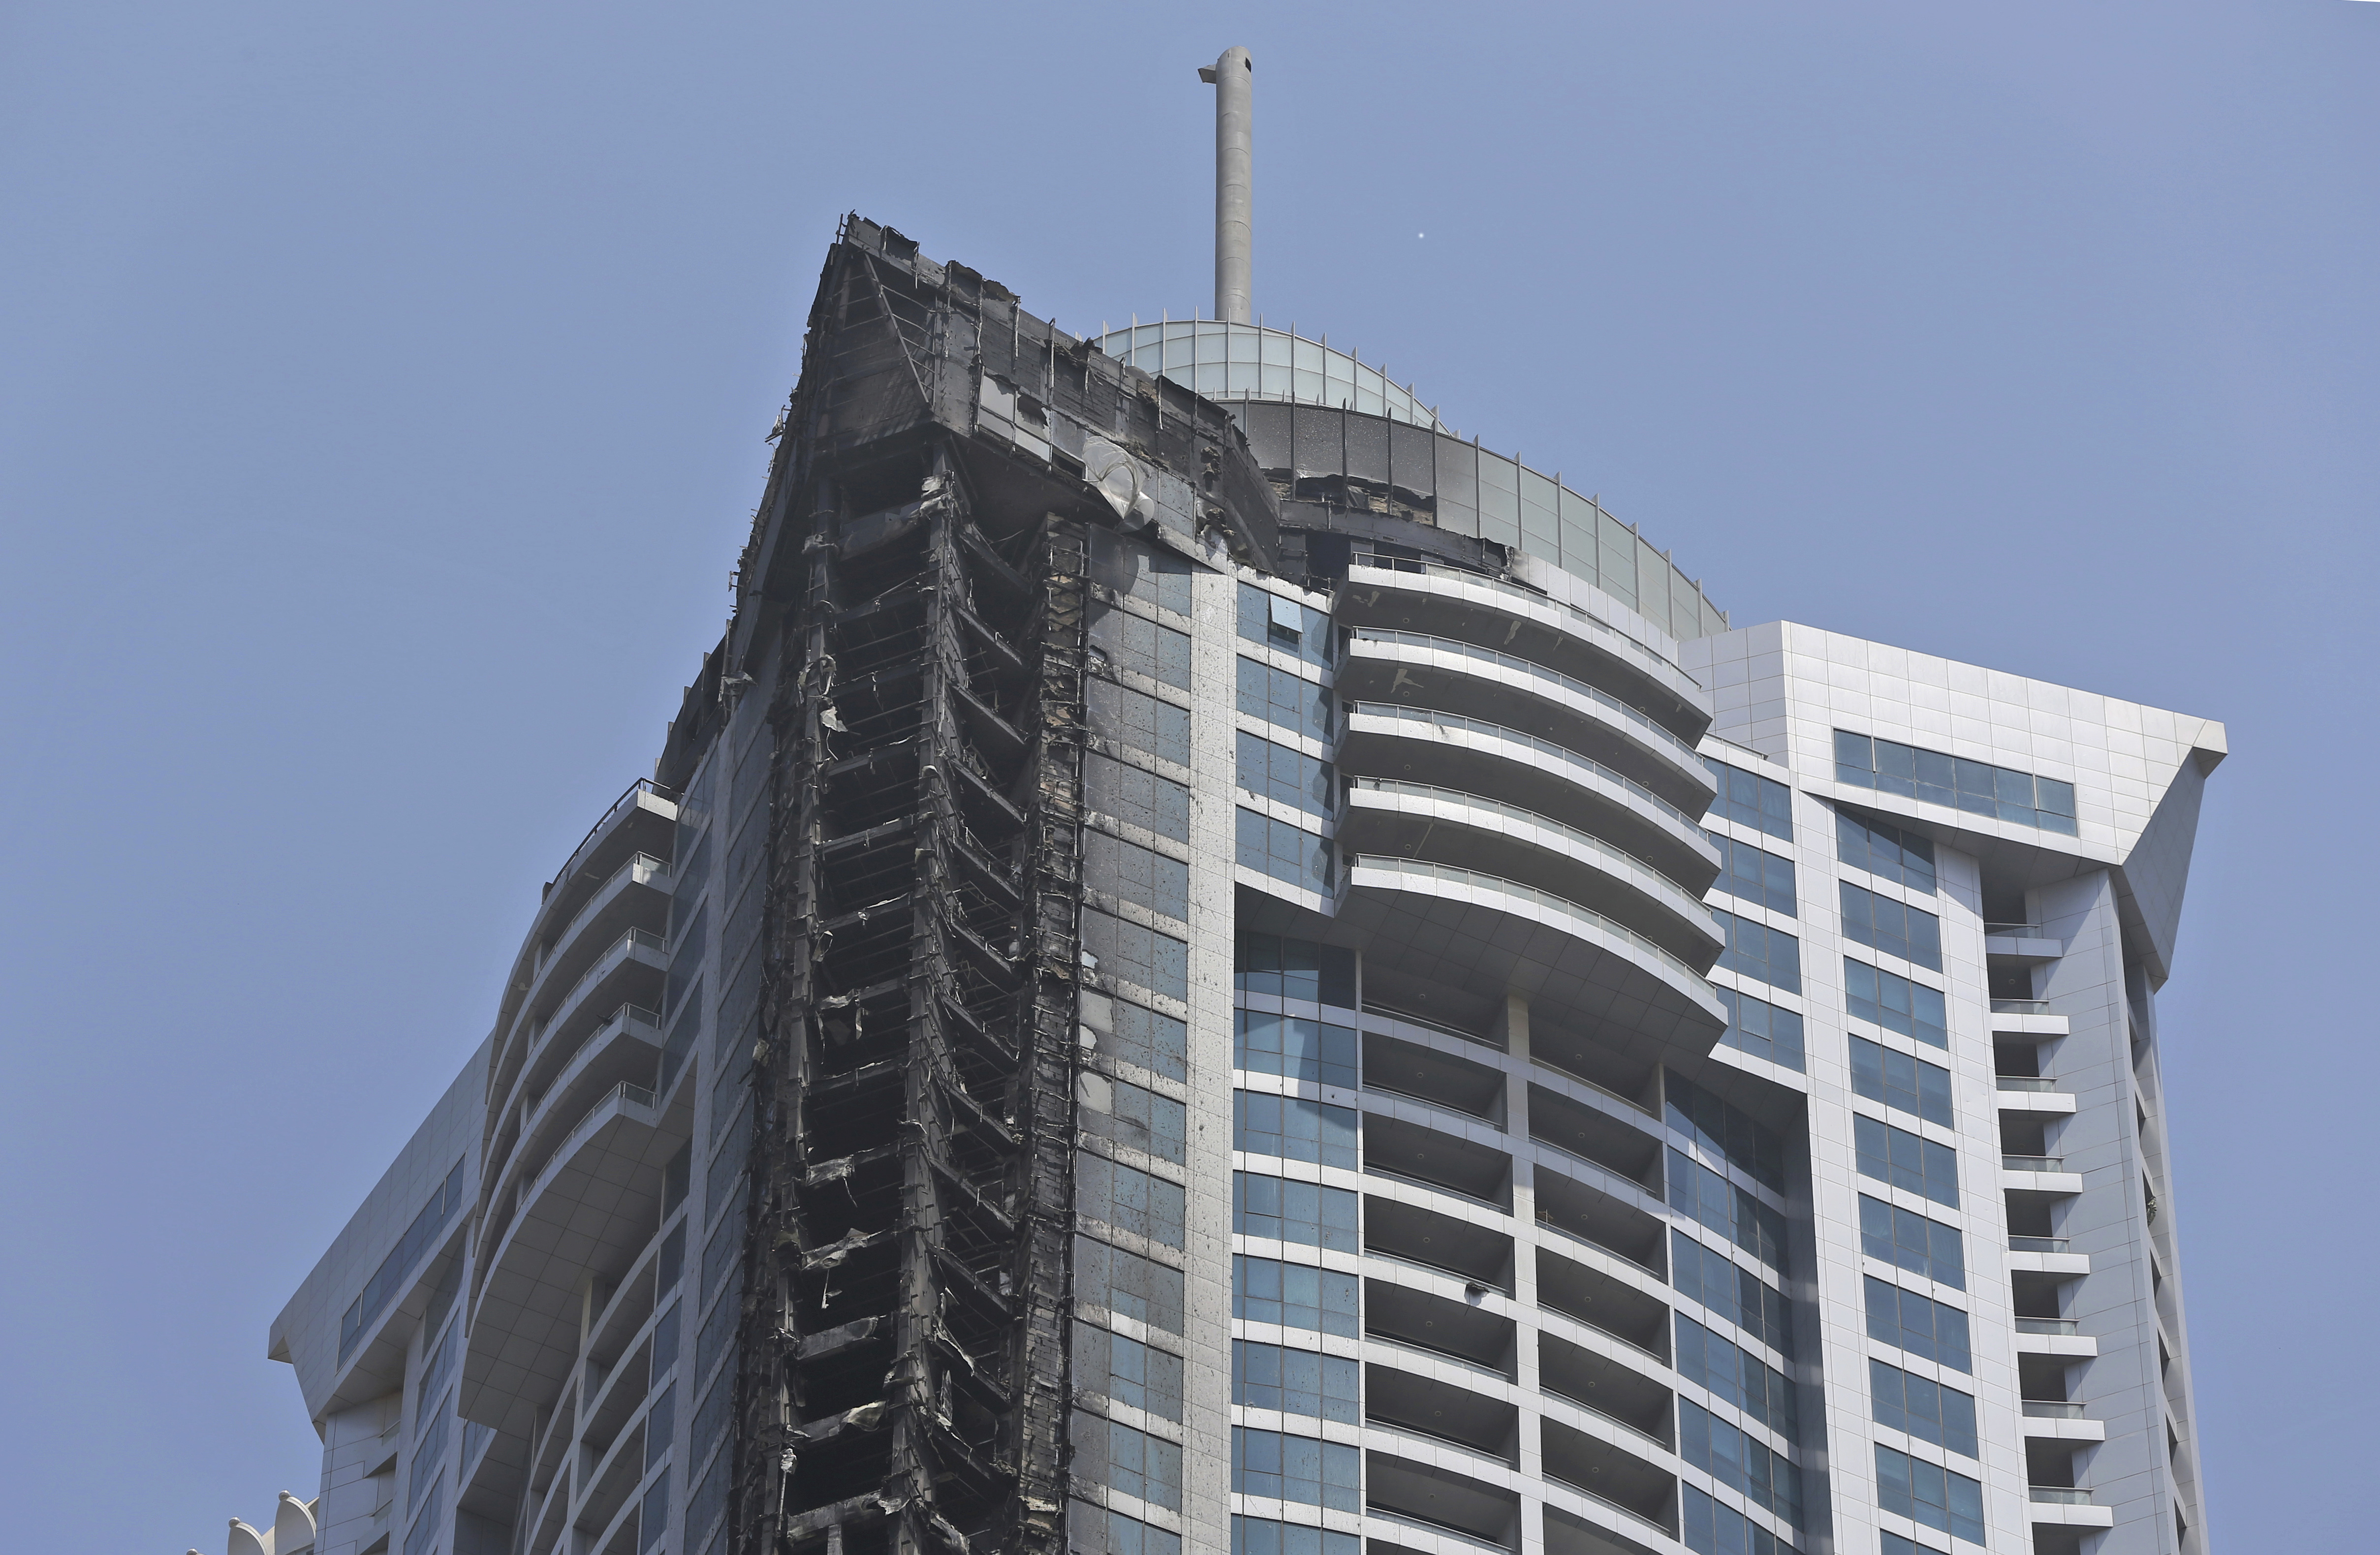 Fire damage on the Torch Tower the morning after (Kamran Jebreili/AP)